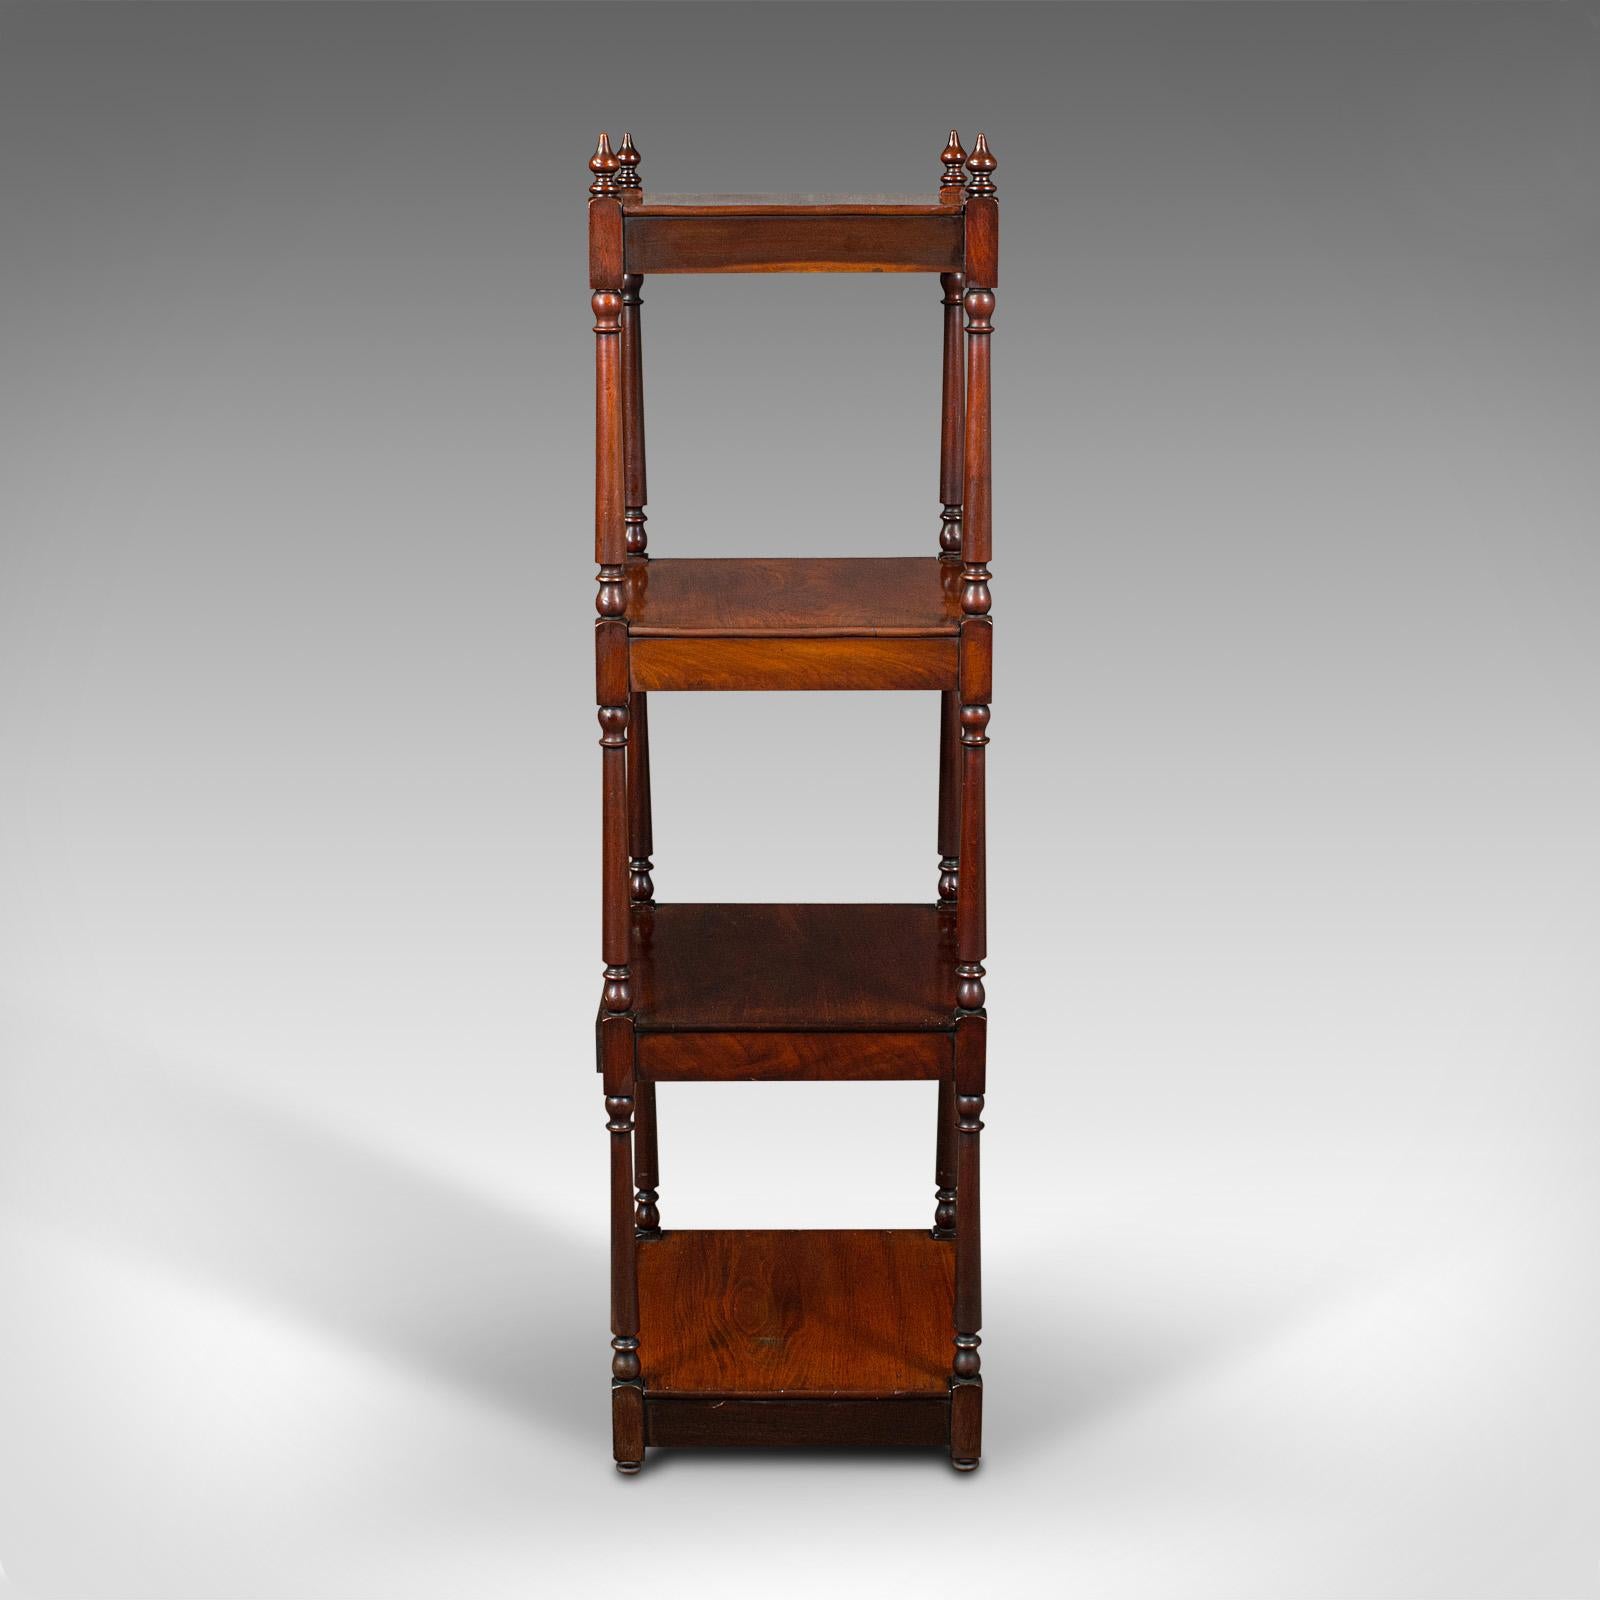 19th Century Antique Display Whatnot, English, 4 Tier, Ornament Stand, Regency, Circa 1820